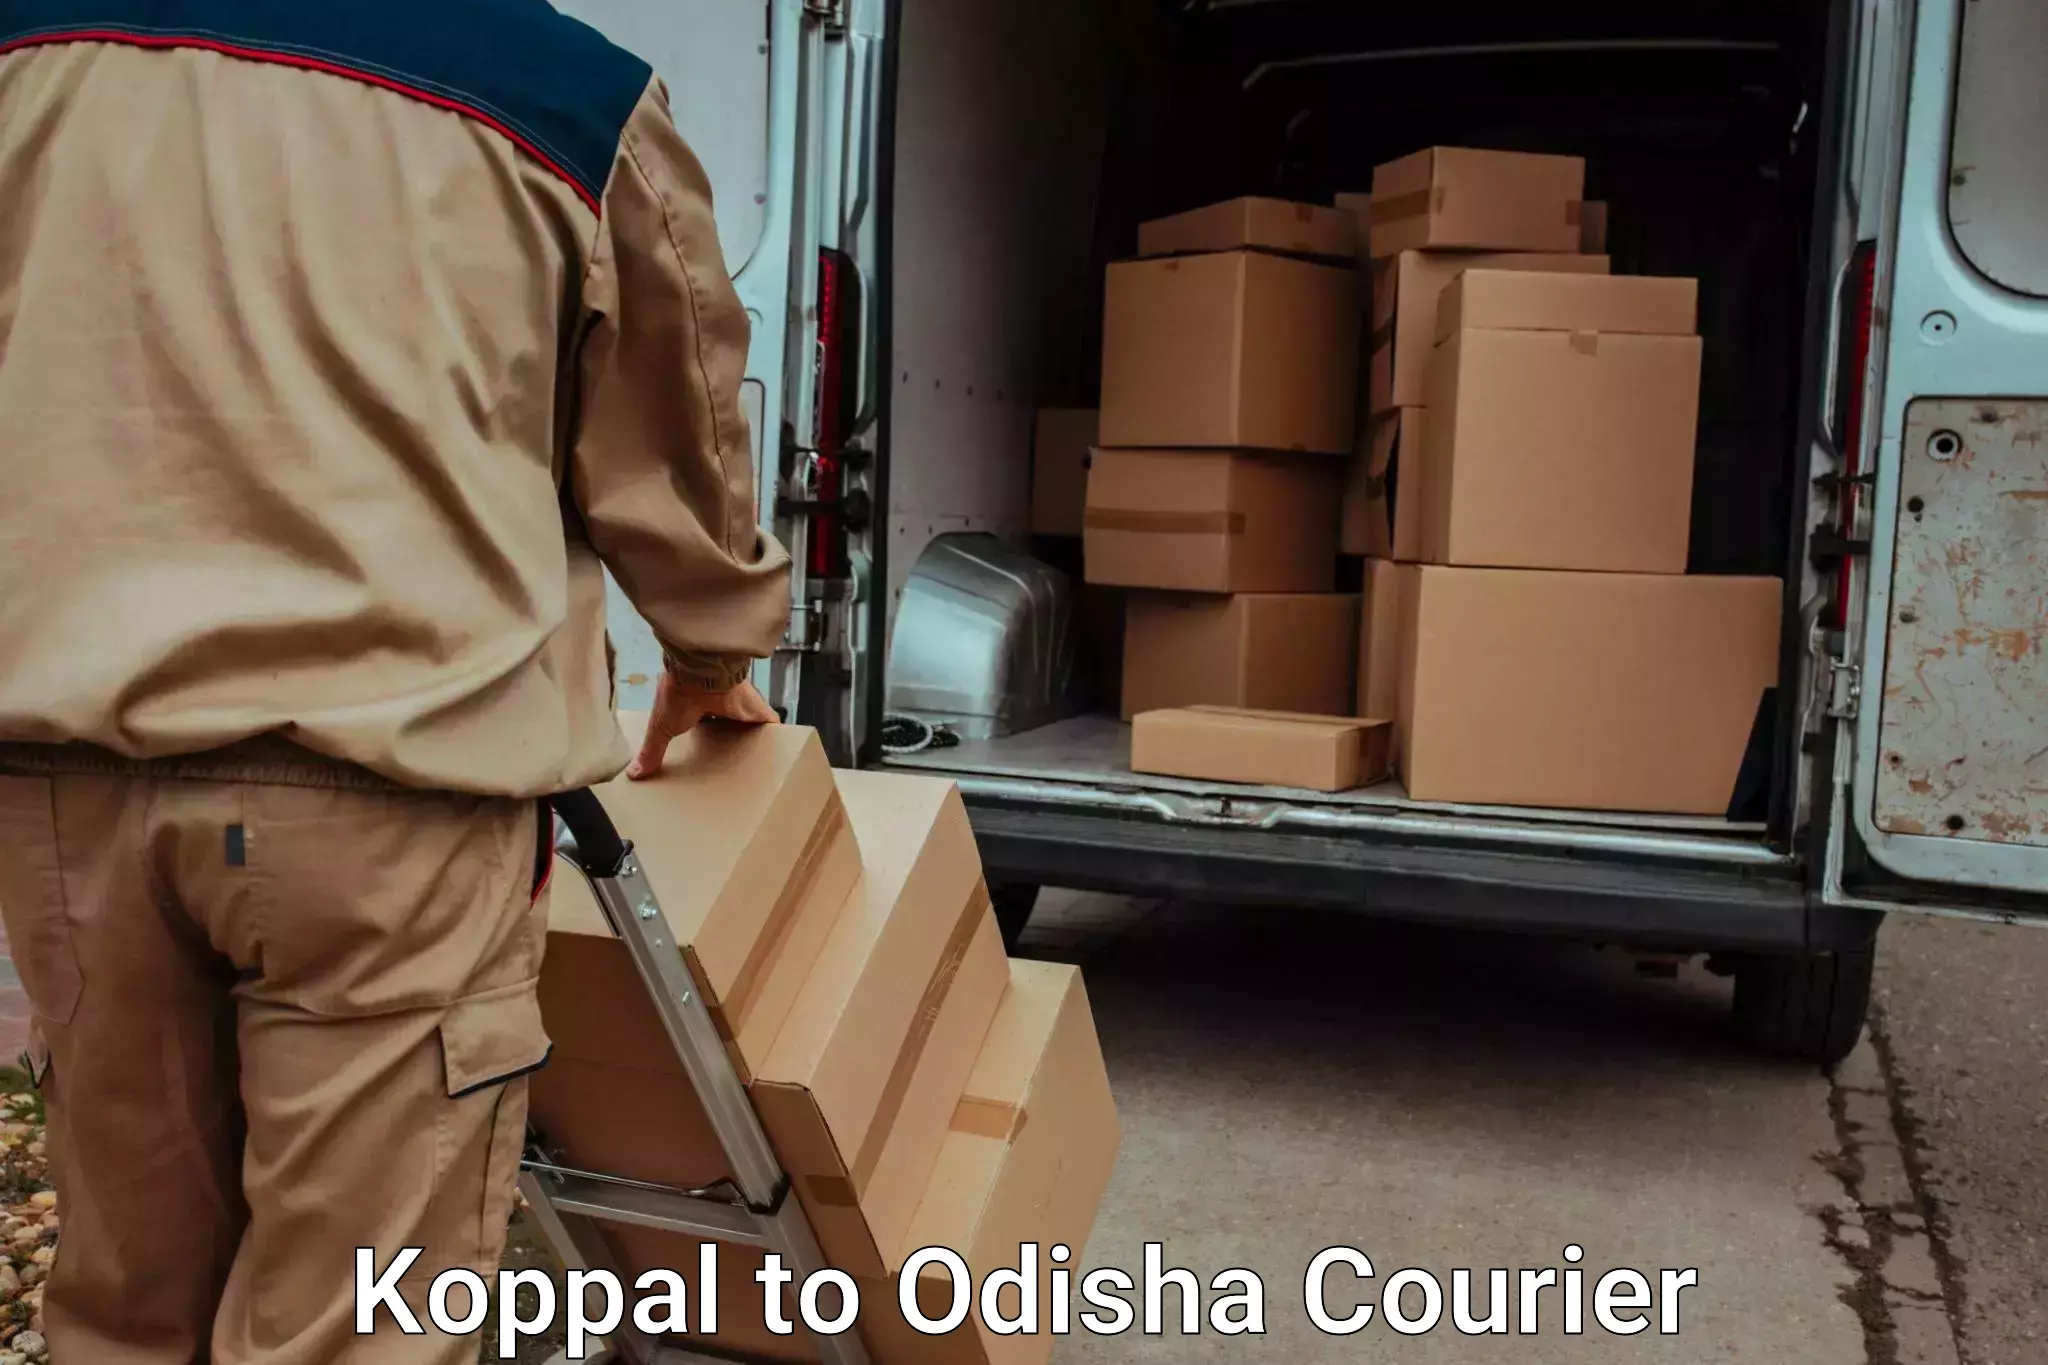 Dependable moving services in Koppal to Odisha